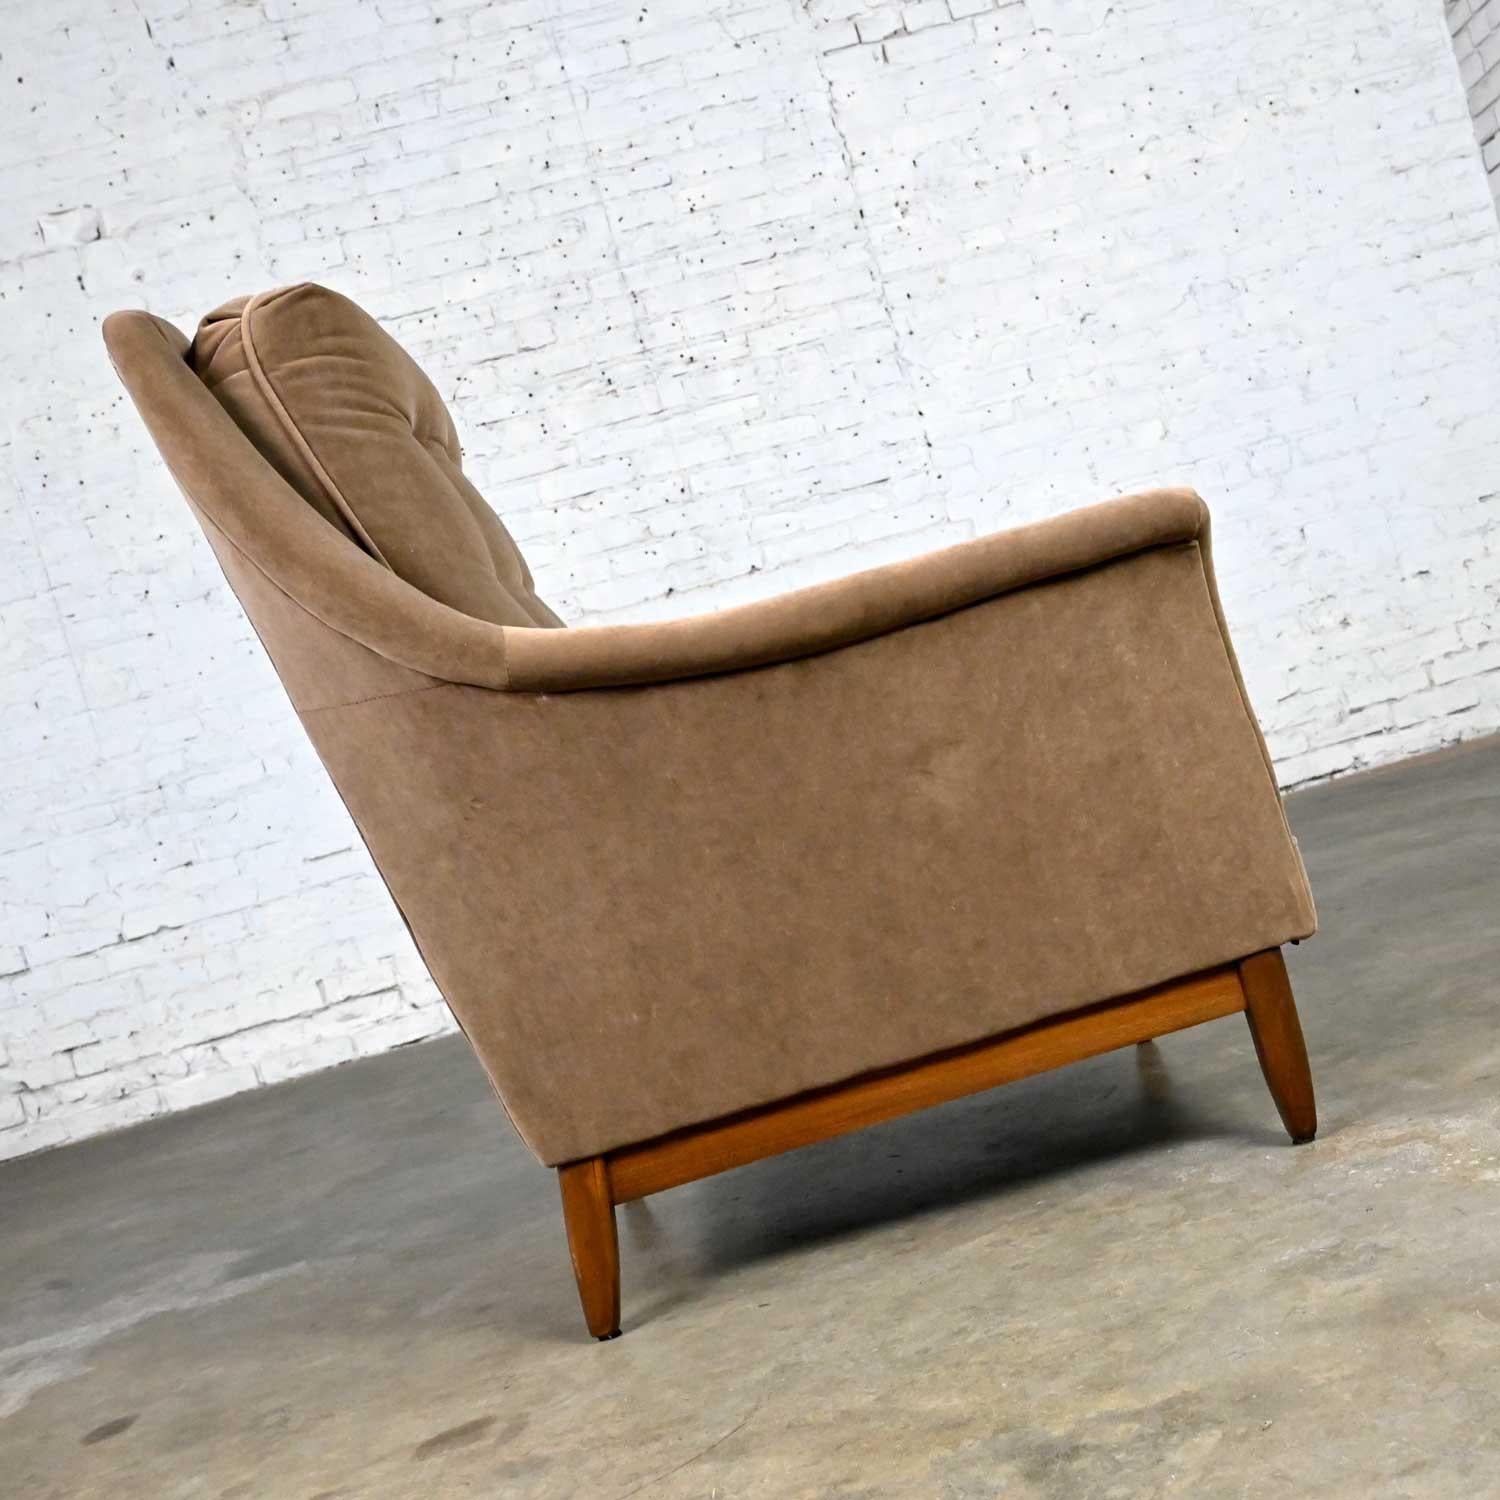 Unknown Vintage Mid-Century Modern Mocha Colored Velvet Club Lounge Chair Style Dunbar For Sale